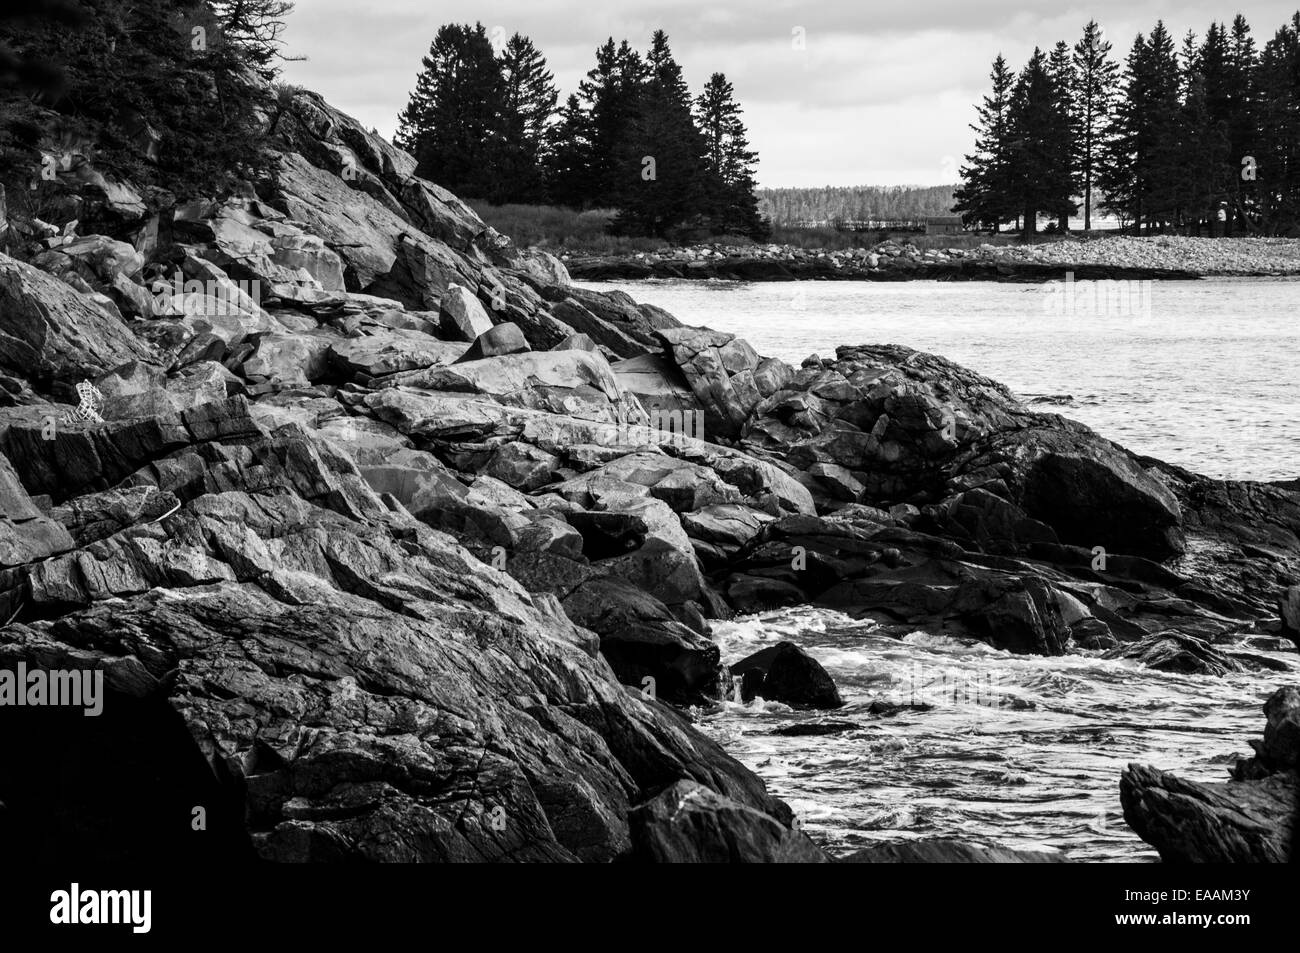 Seascape vista looking past a rocky shore to an island. Stock Photo